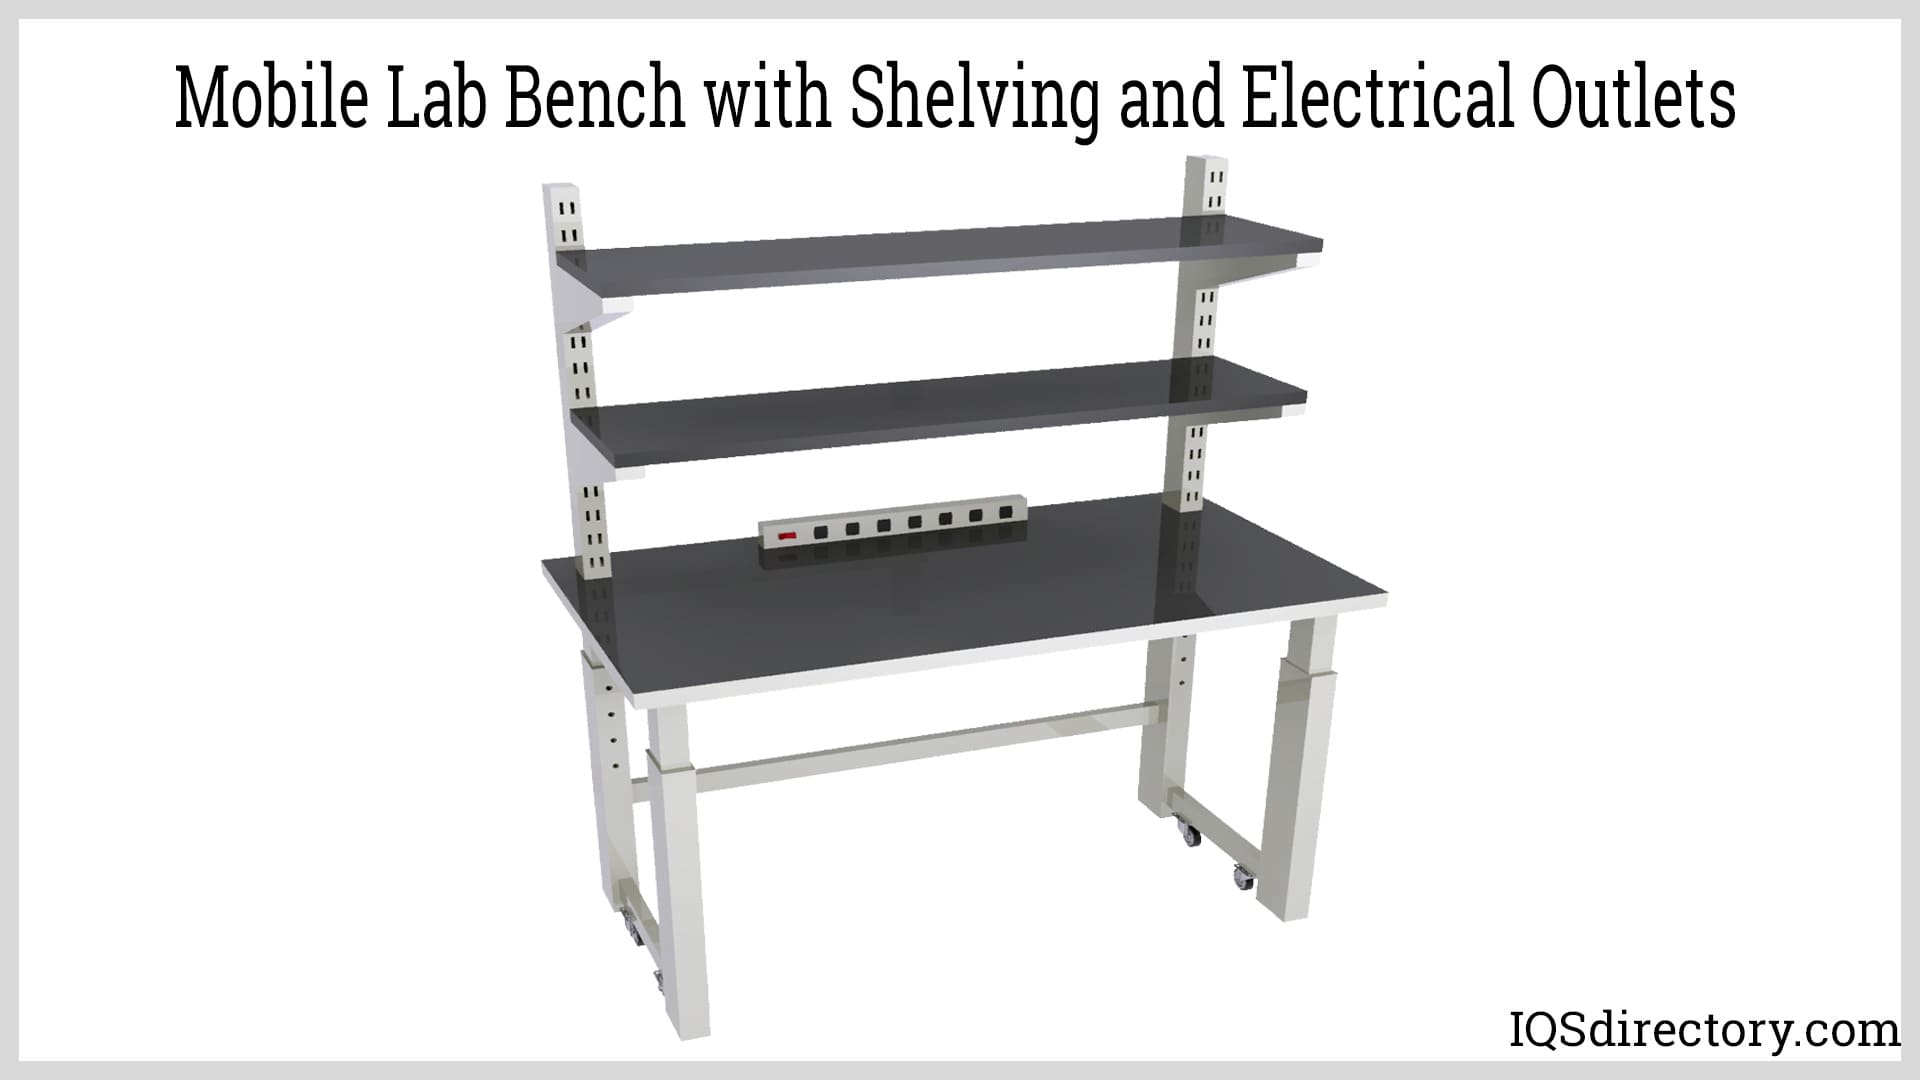 Mobile Lab Bench with Shelving and Electrical Outlets